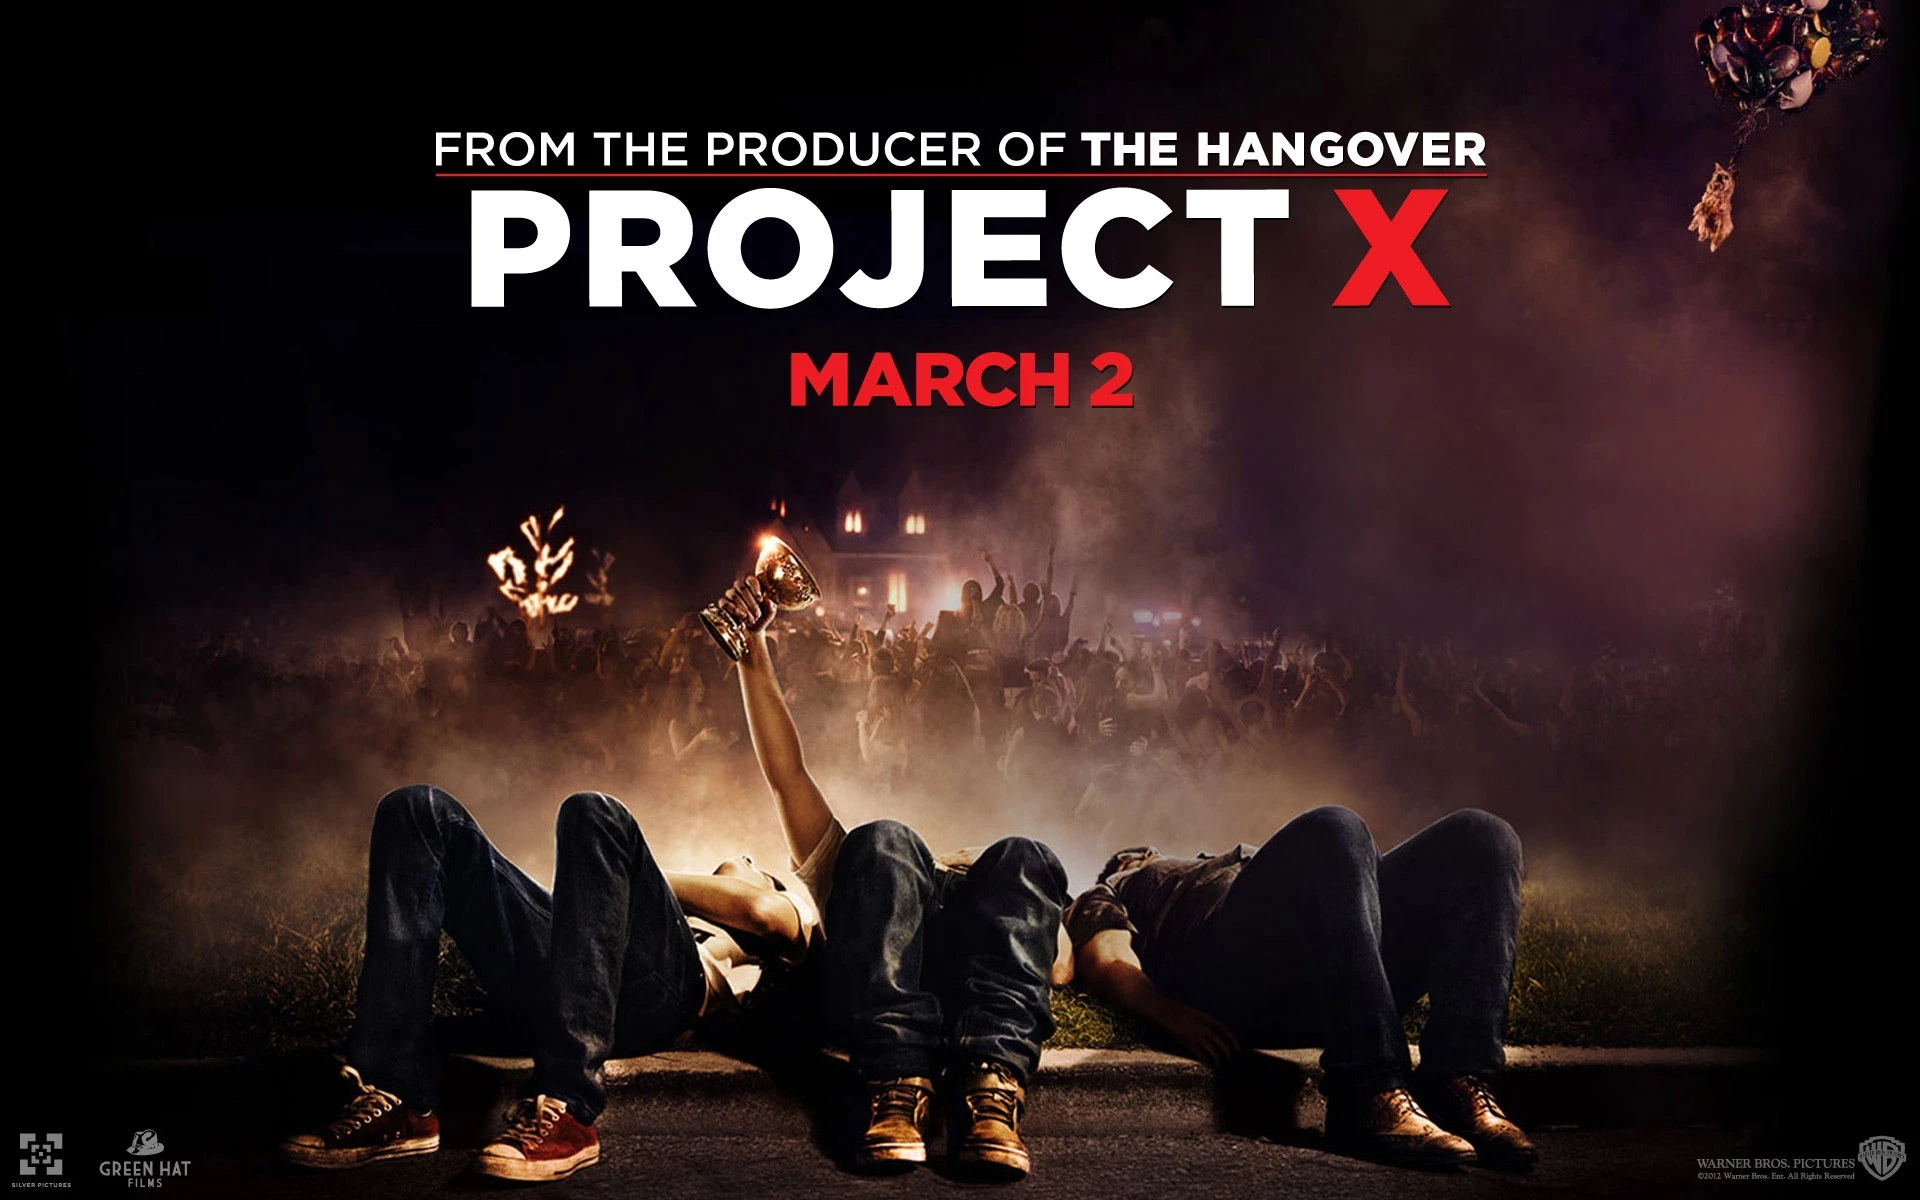 Project X (2012) - movies like American Pie